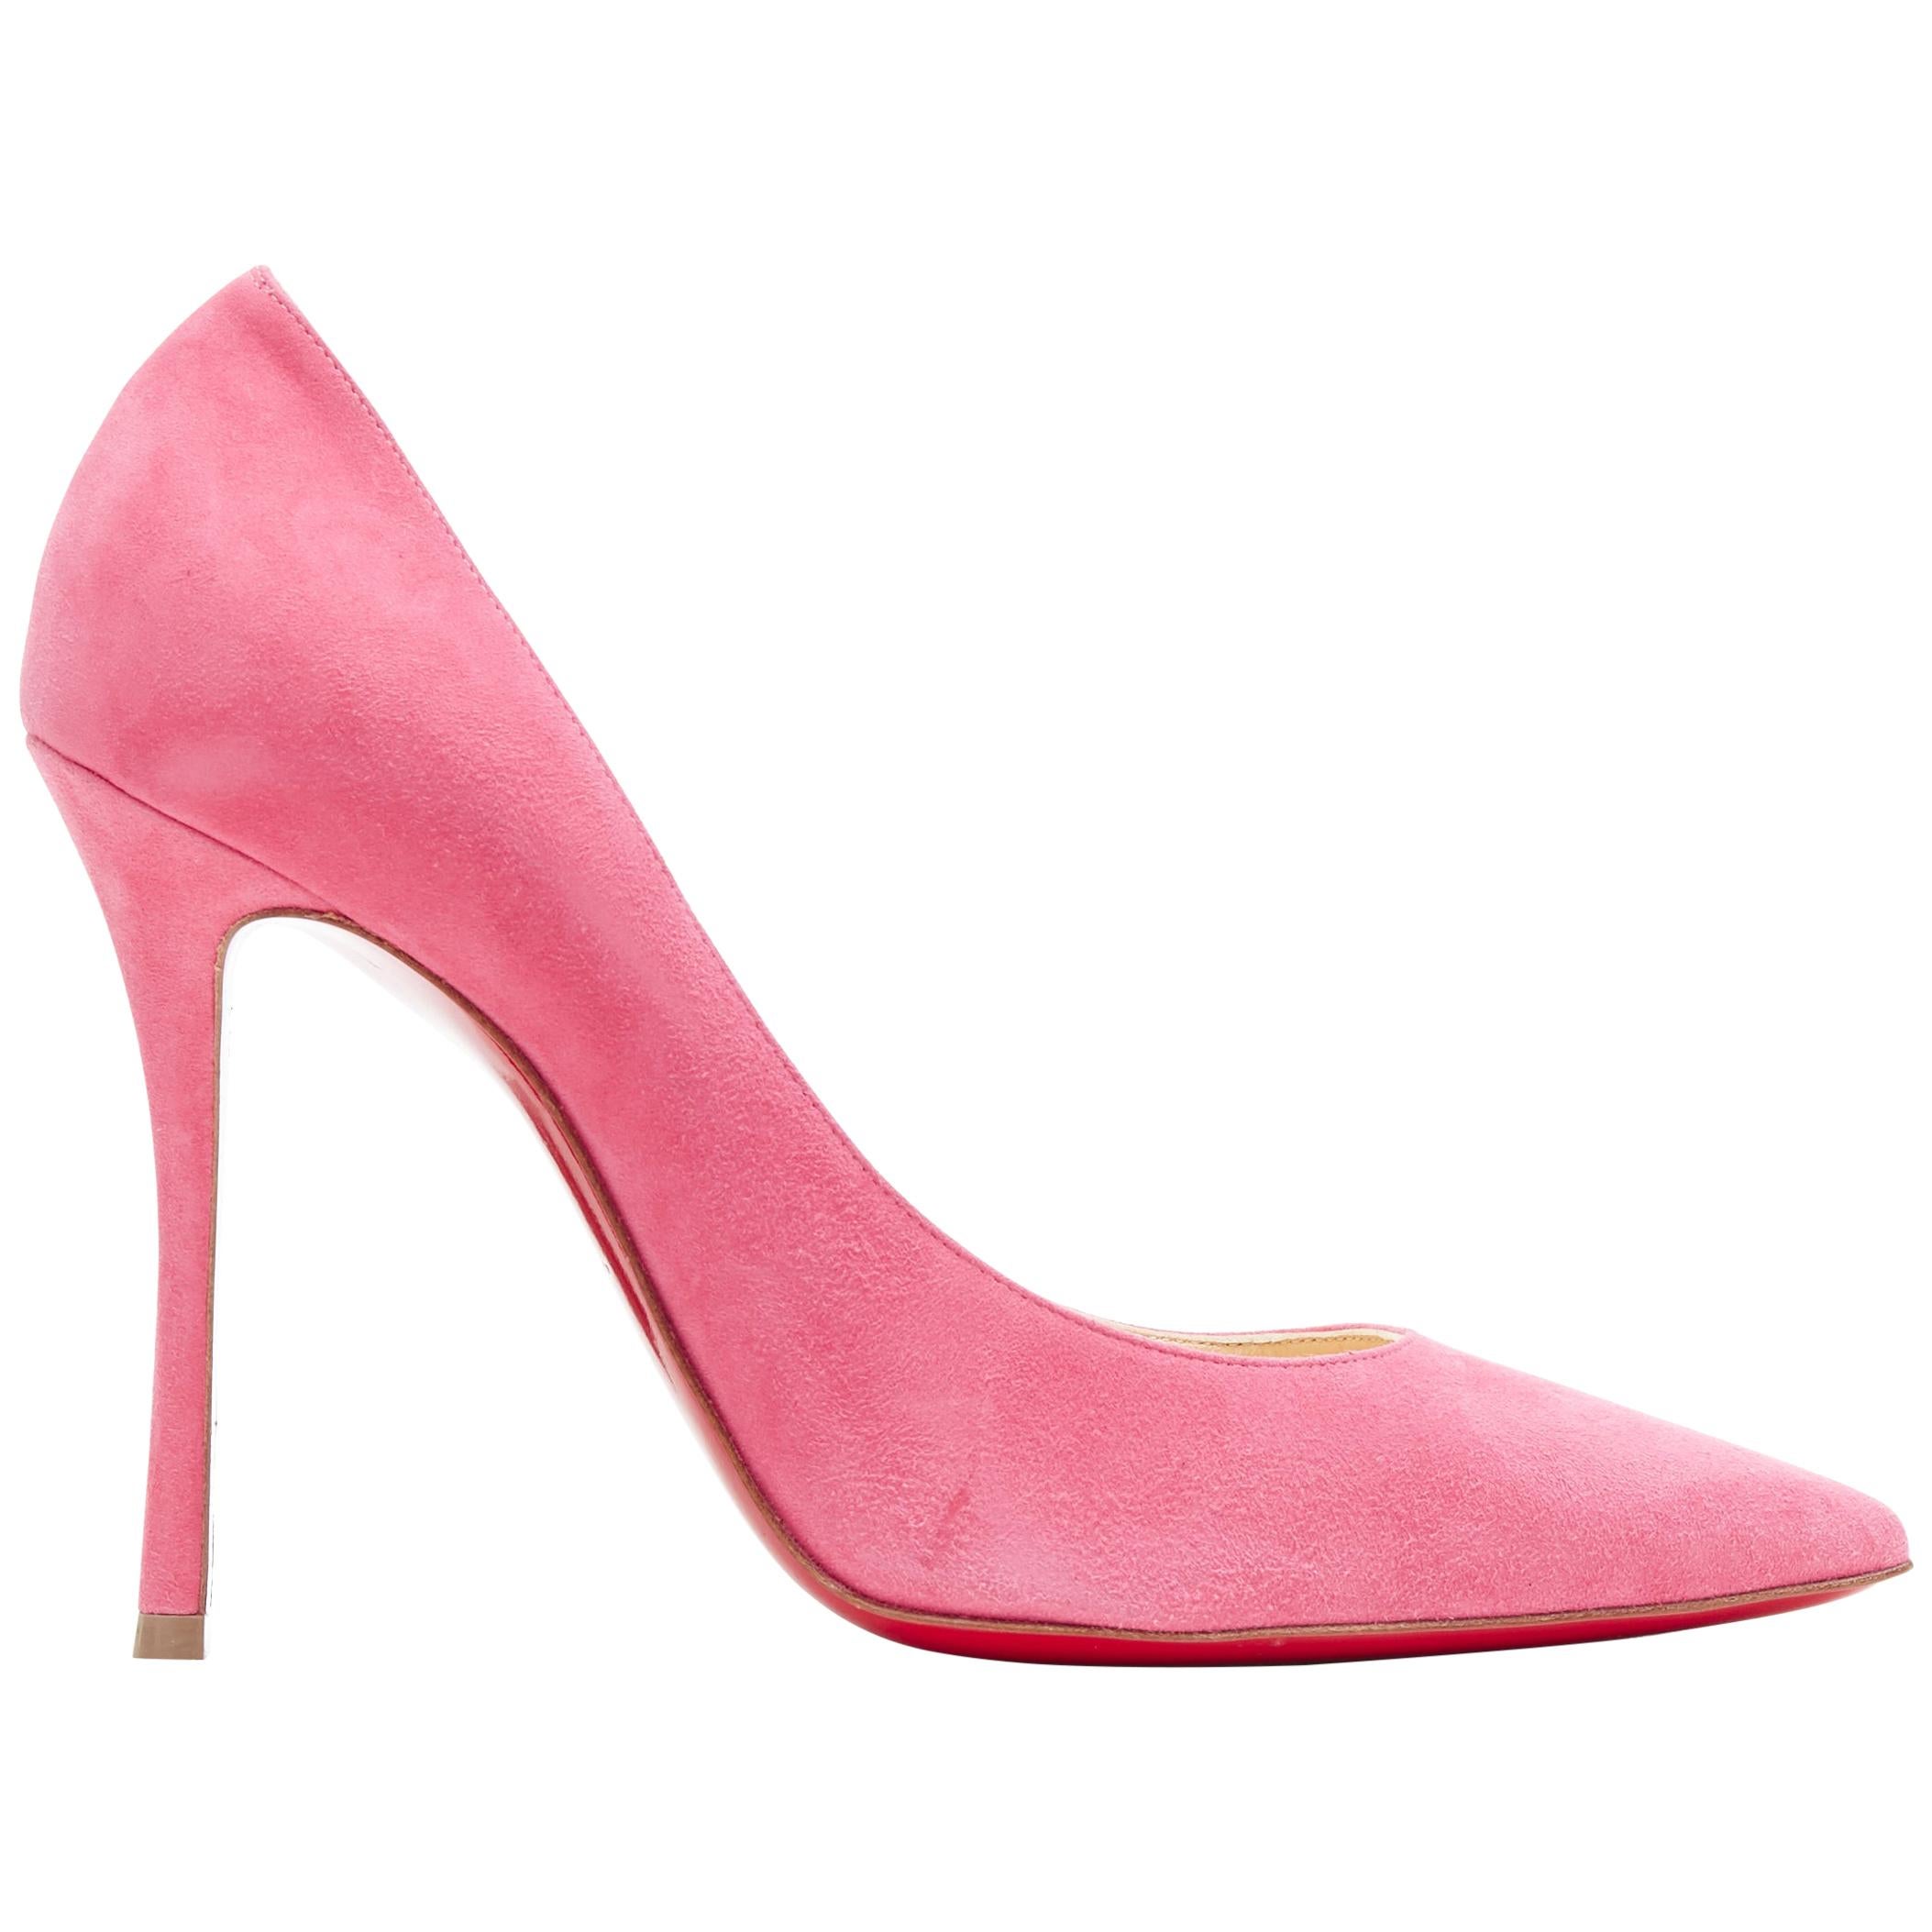 CHRISTIAN LOUBOUTIN pink suede leather pointy toe stiletto pigalle pump EU38